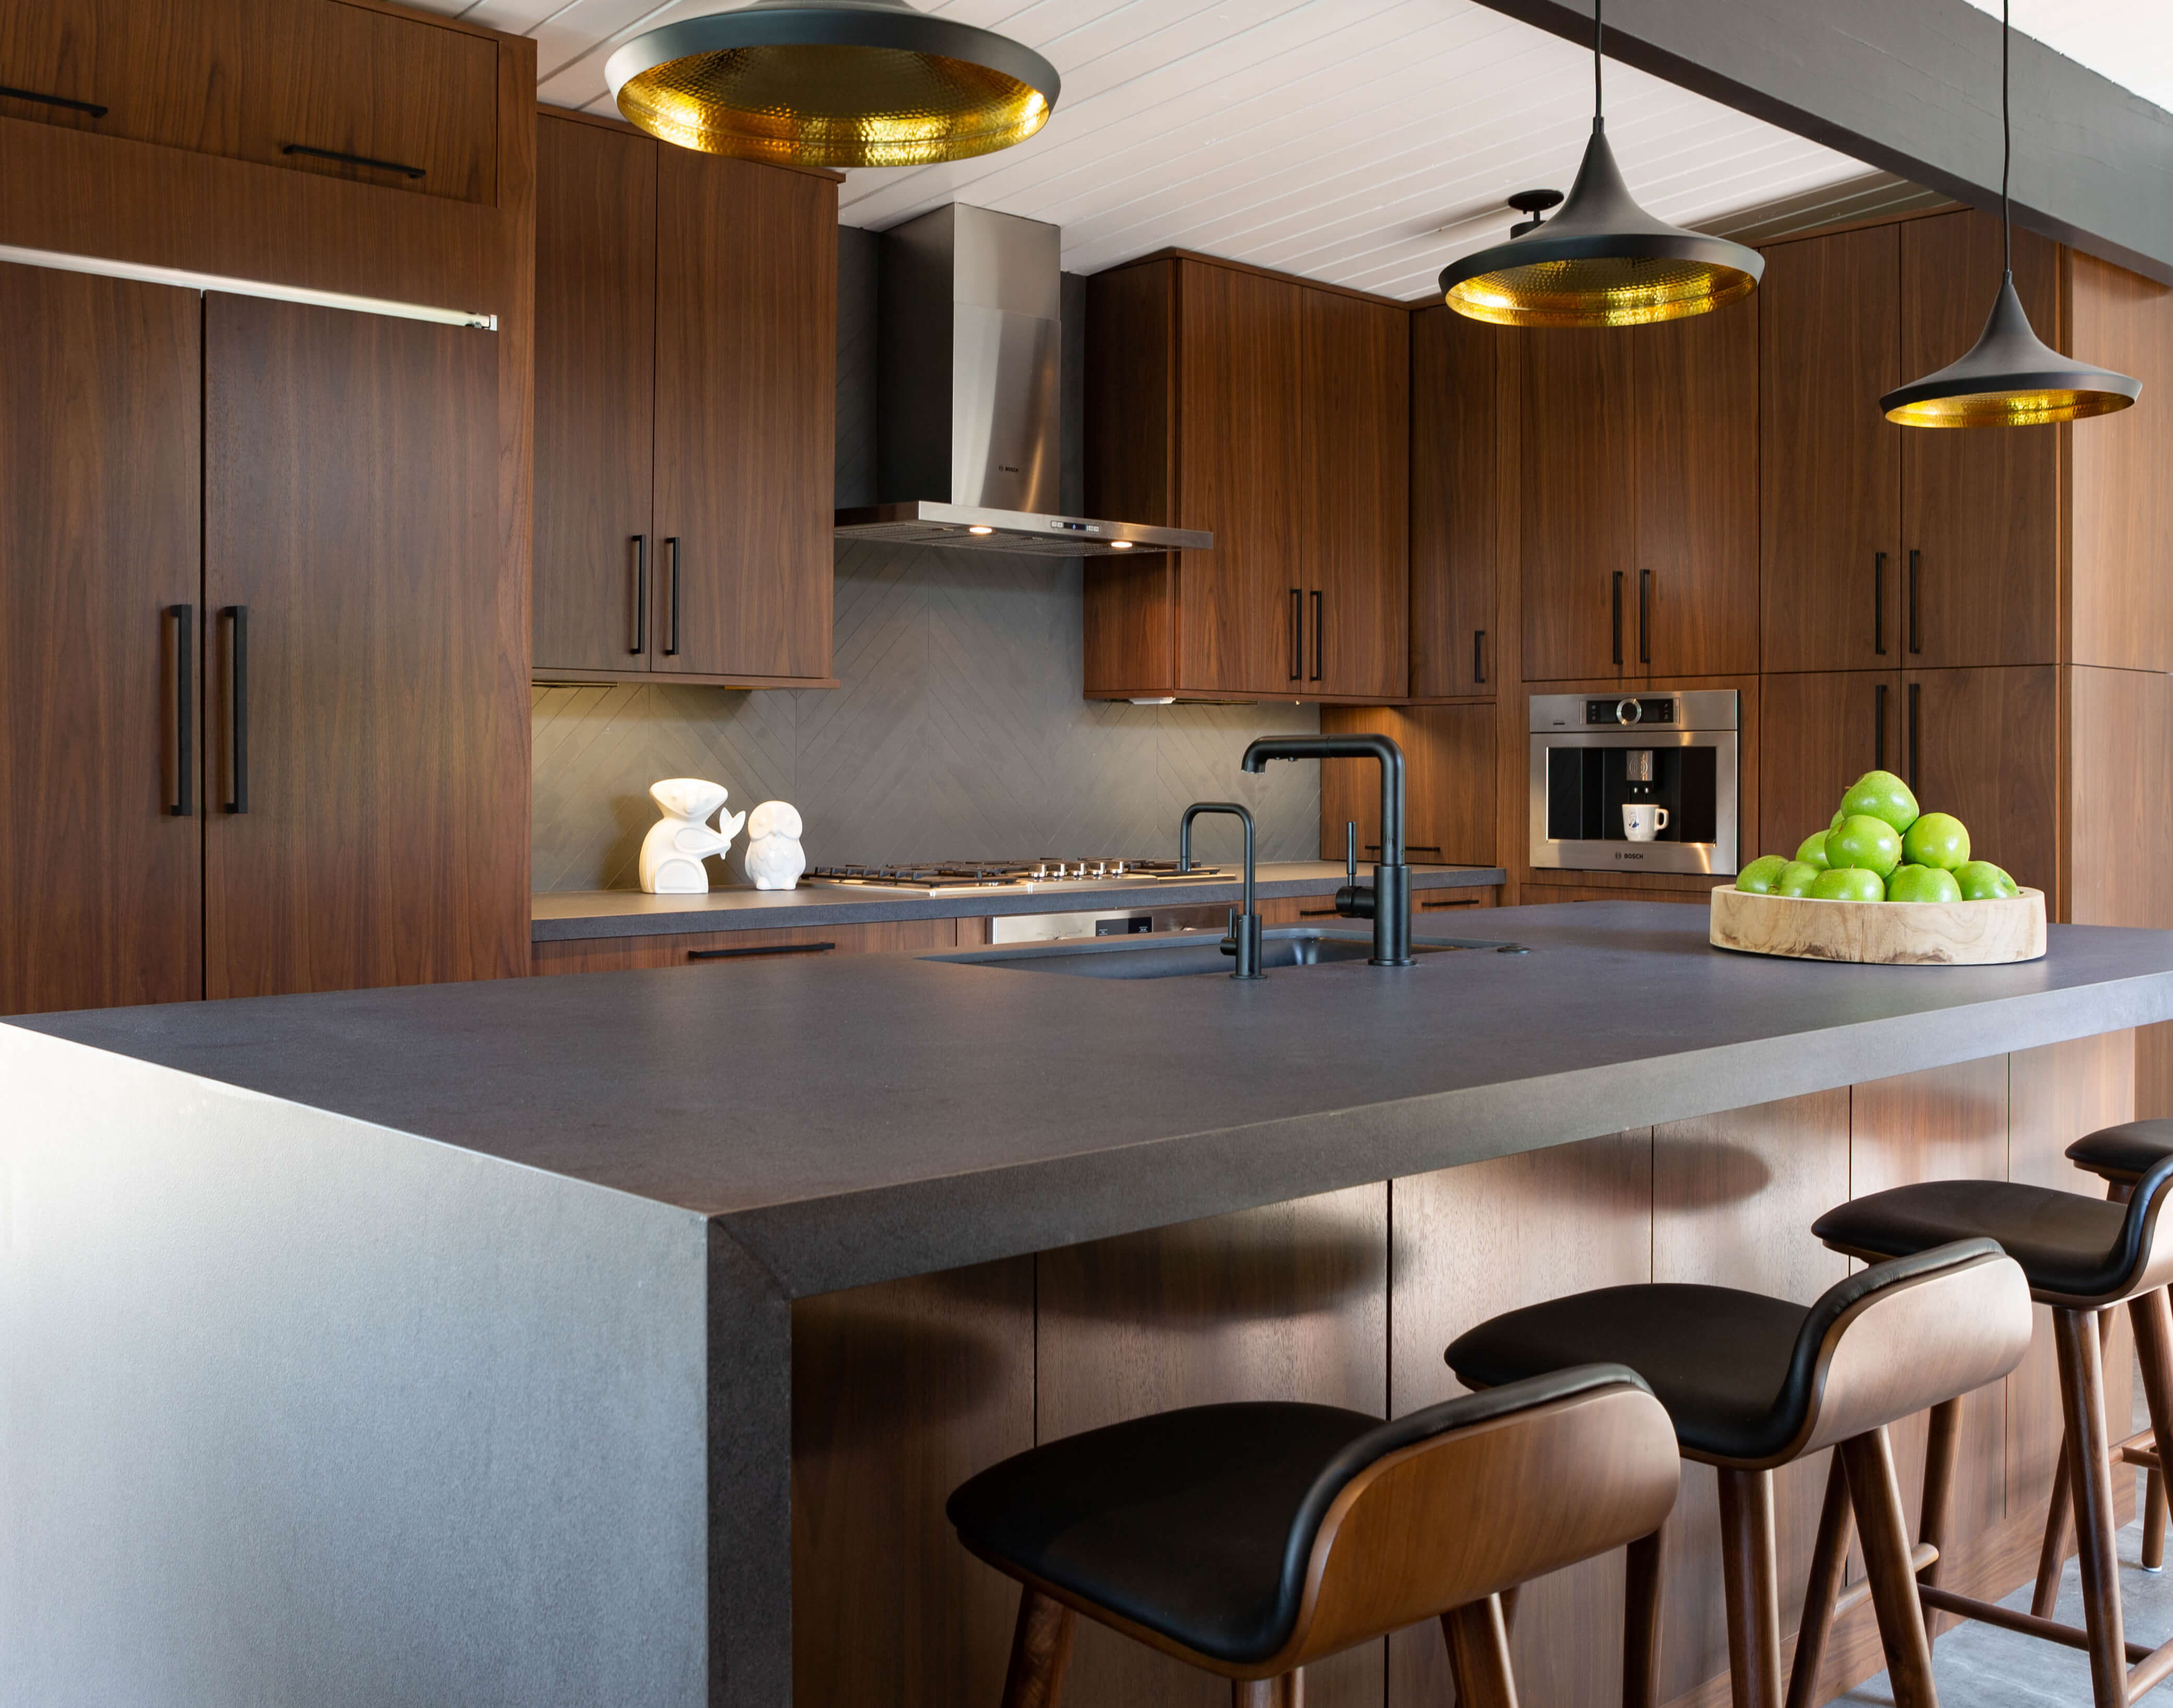 A dark walnut kitchen with a mid-century modern design style and a waterfall kitchen countertop.